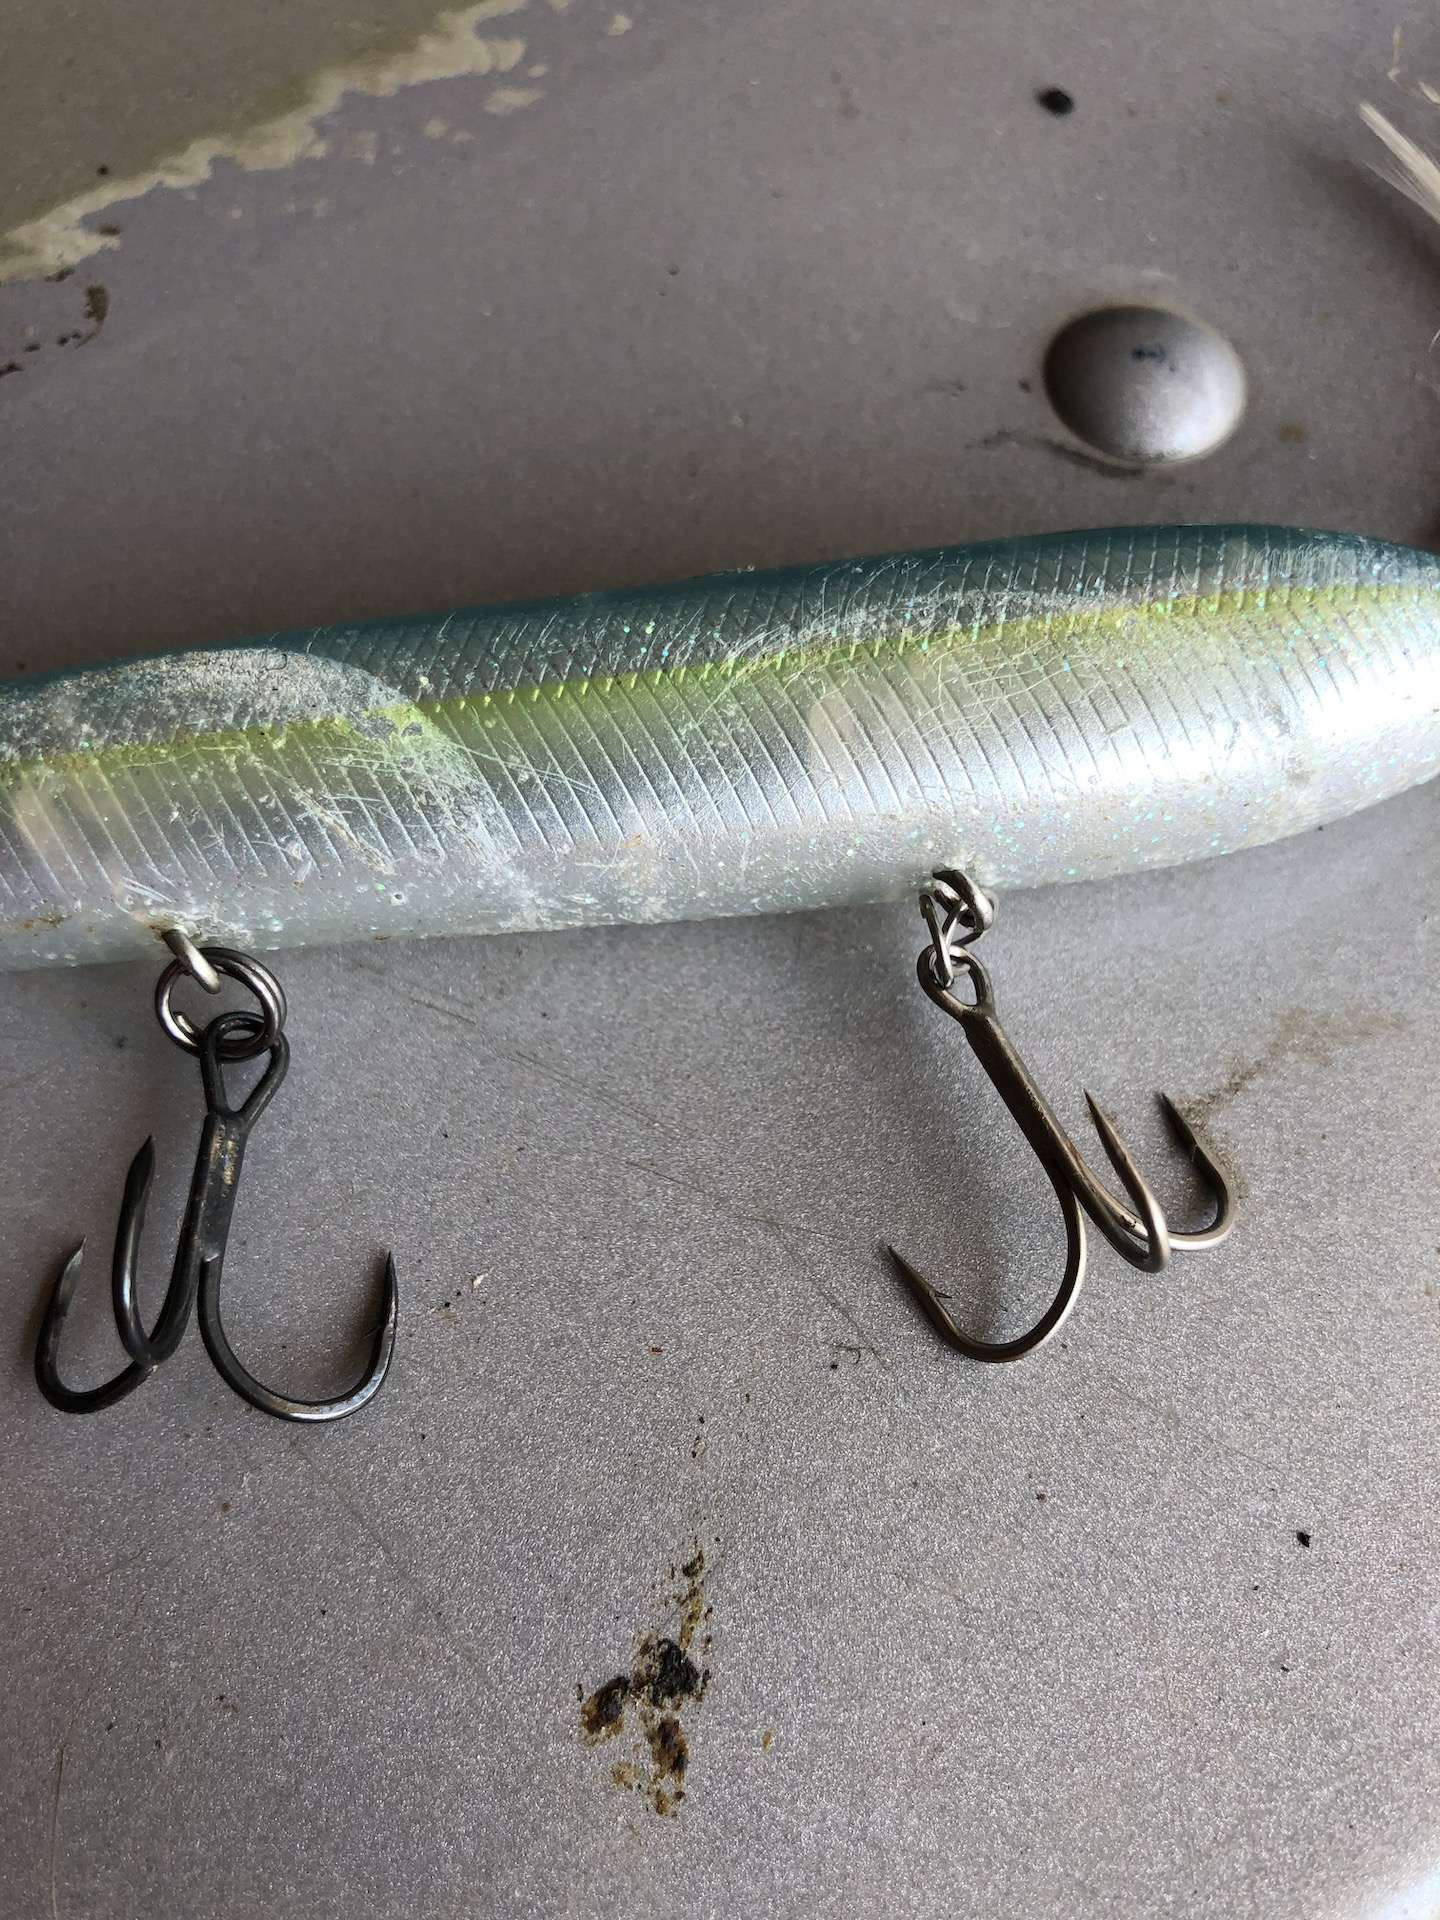 Top Water Replacement Treble Hooks ? - Fishing Tackle - Bass